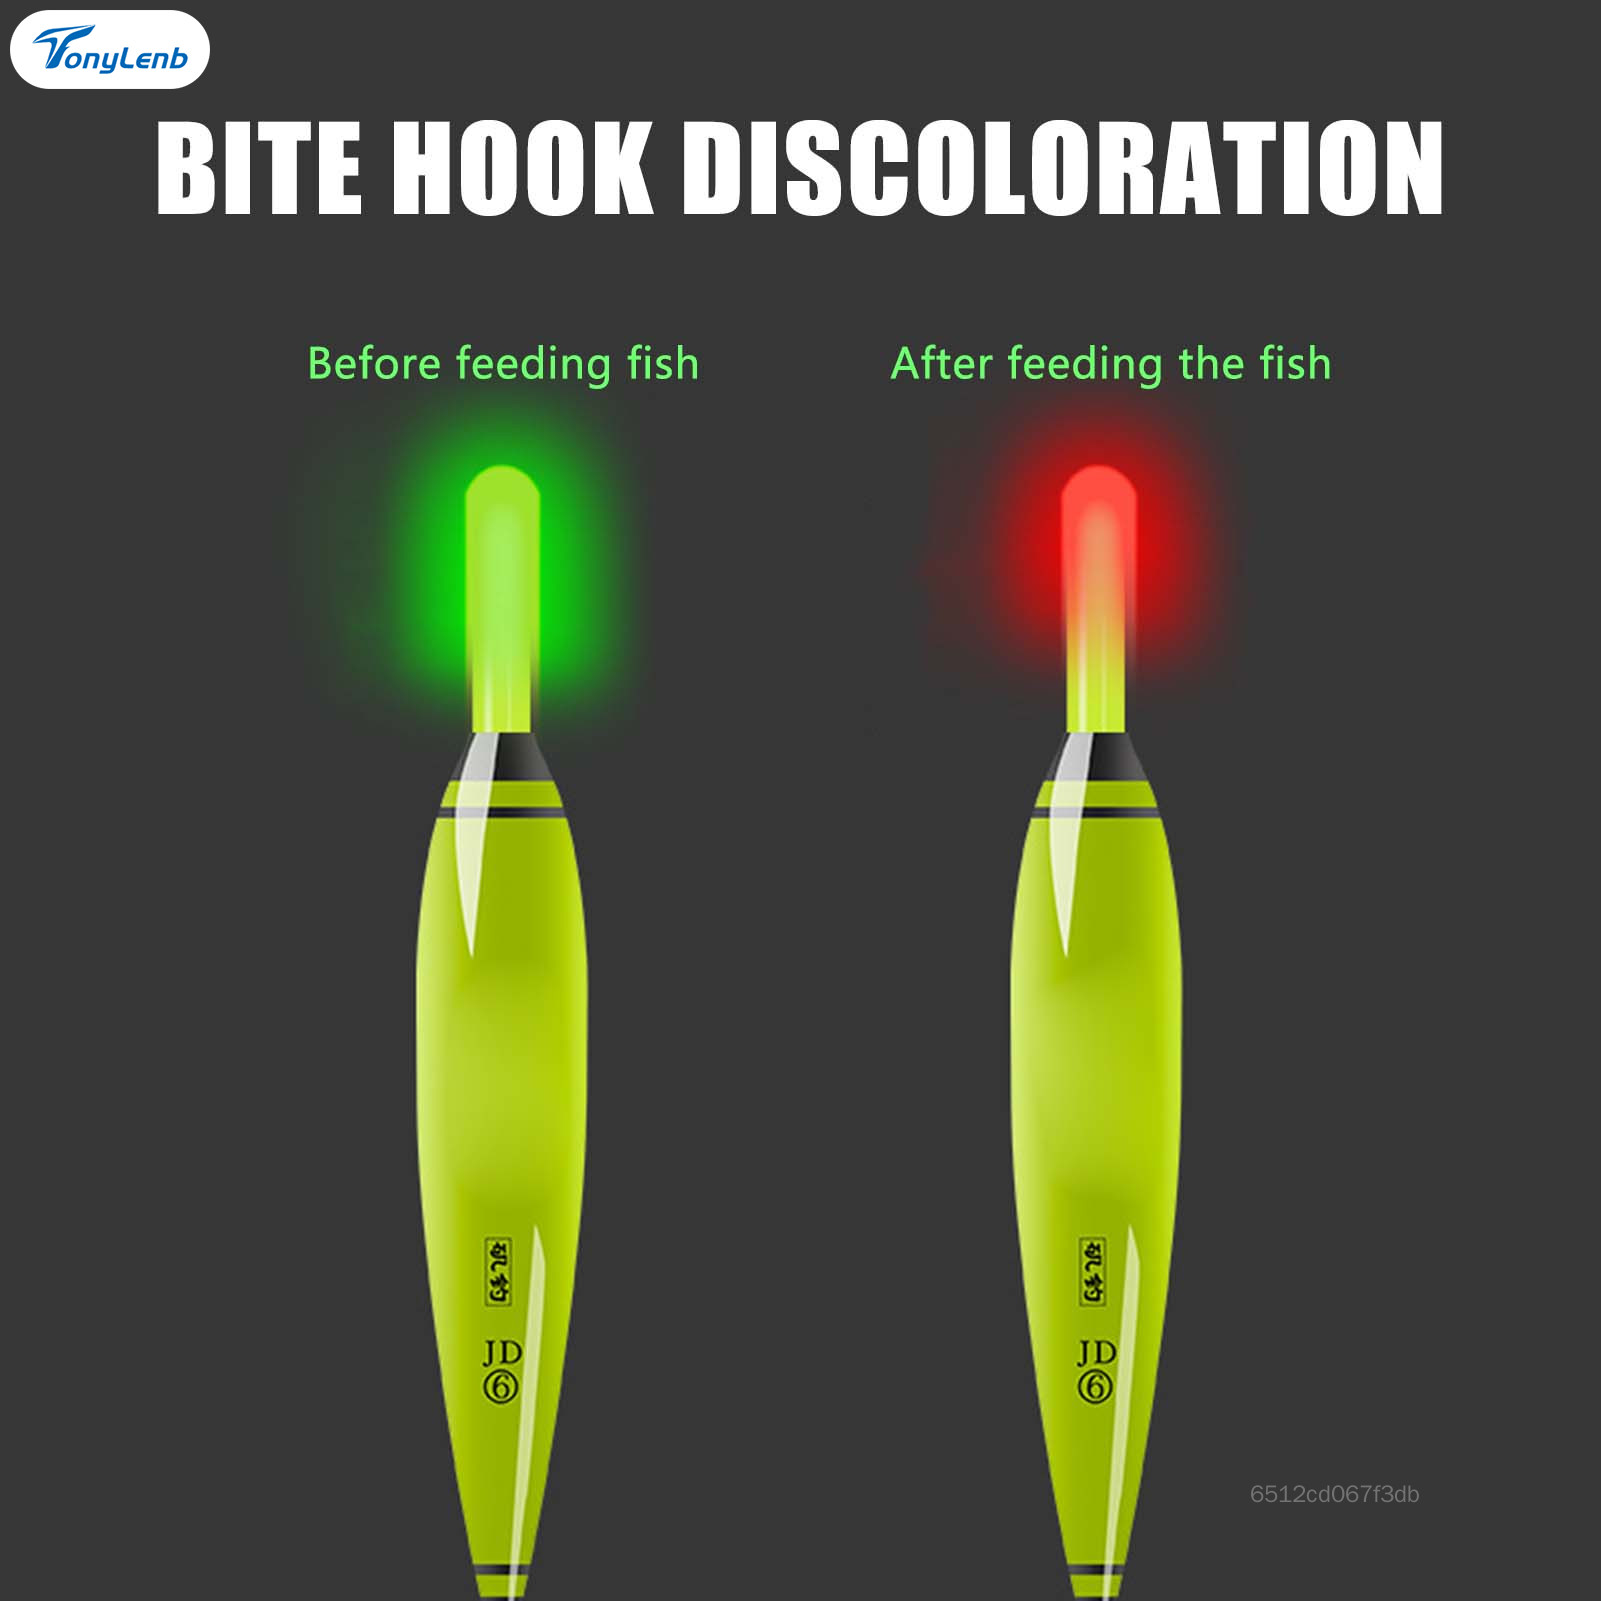 TonyLen Lighted Bobbers Fishing Floats Color Change LED Lighted Fishing  Bobbers for Night Fishing SuppliesTonyLen Lighted Bobbers Fishing Floats  Color Change LED Lighted Fishing Bobbers for Night Fishing Supplies TL-MY